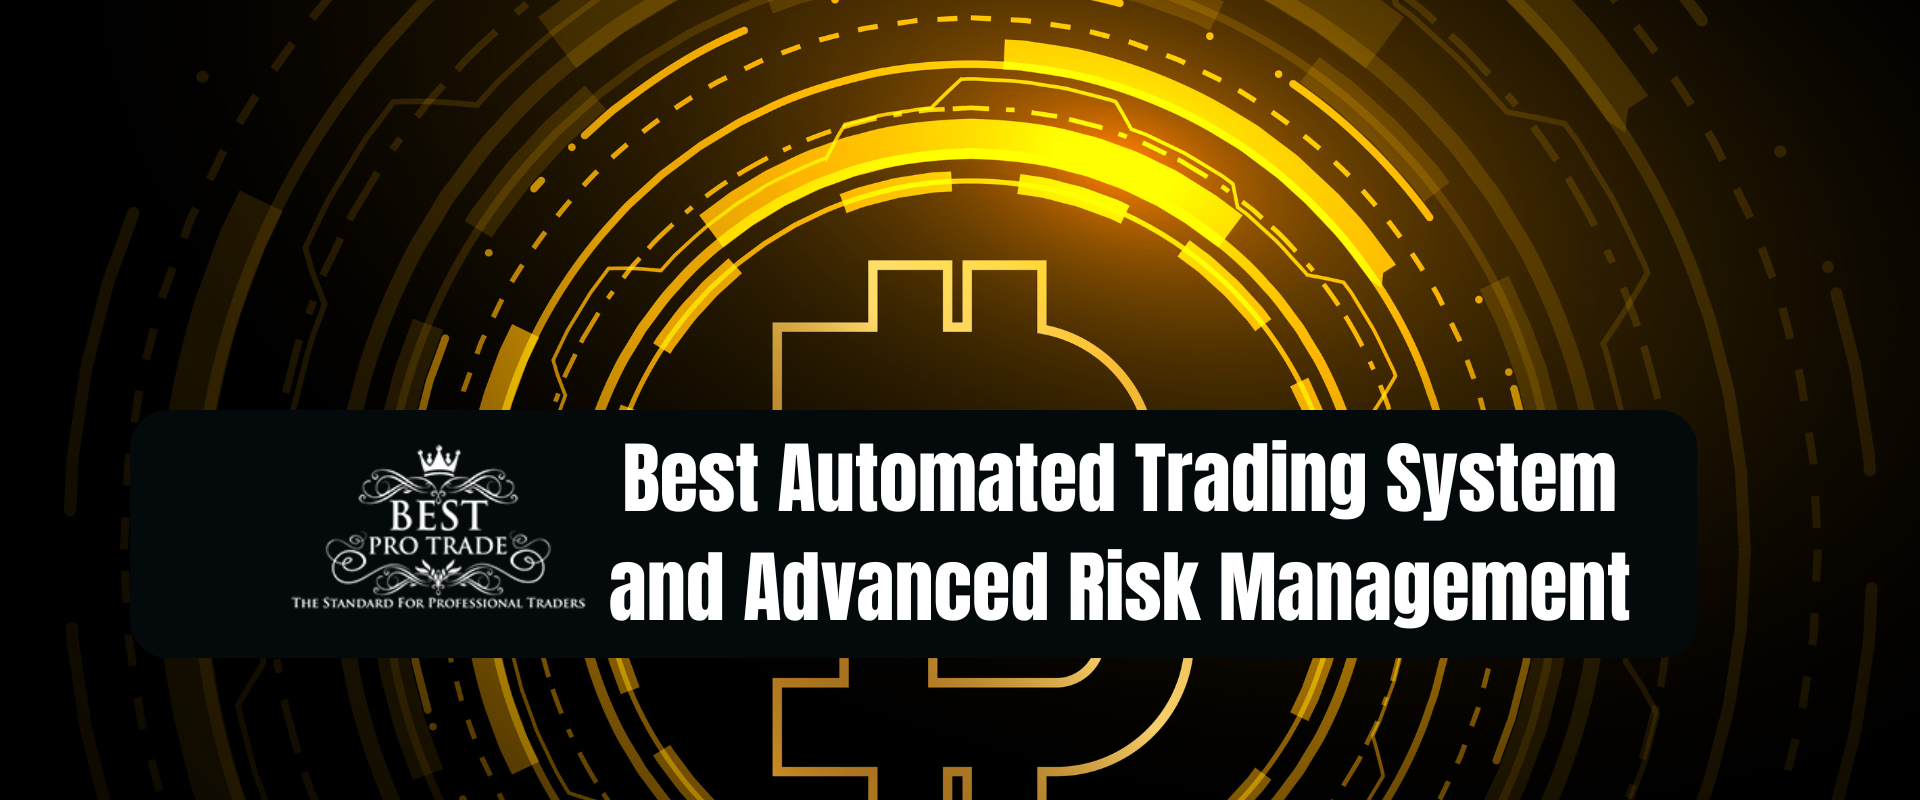 best automated trading system